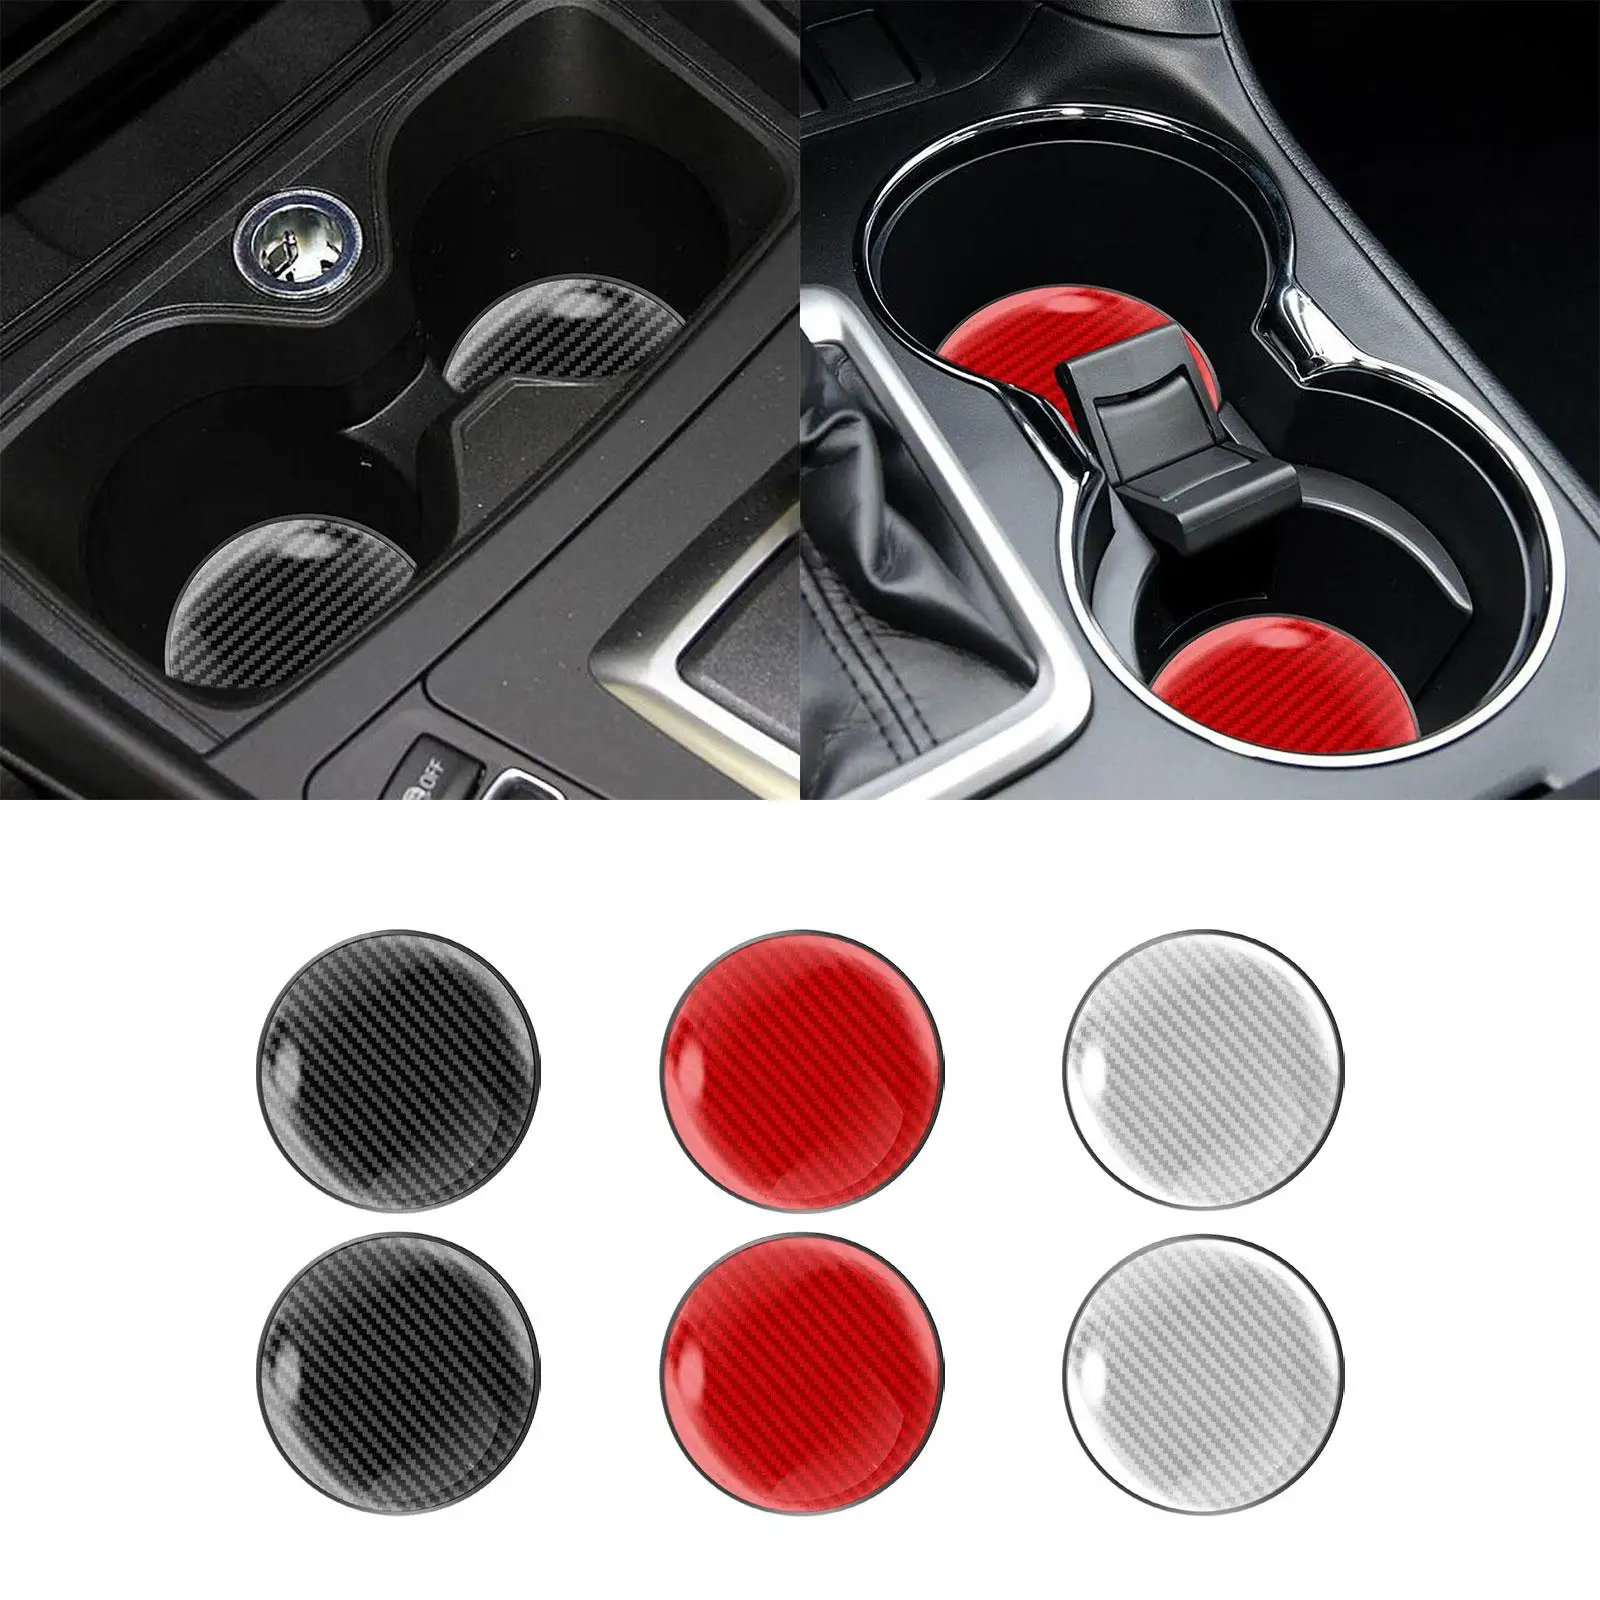 2 Pieces Cup Holder Coaster Universal Shockproof Waterproof Water Cup Coasters Slot Drink Mat for Travel Outdoor Driving